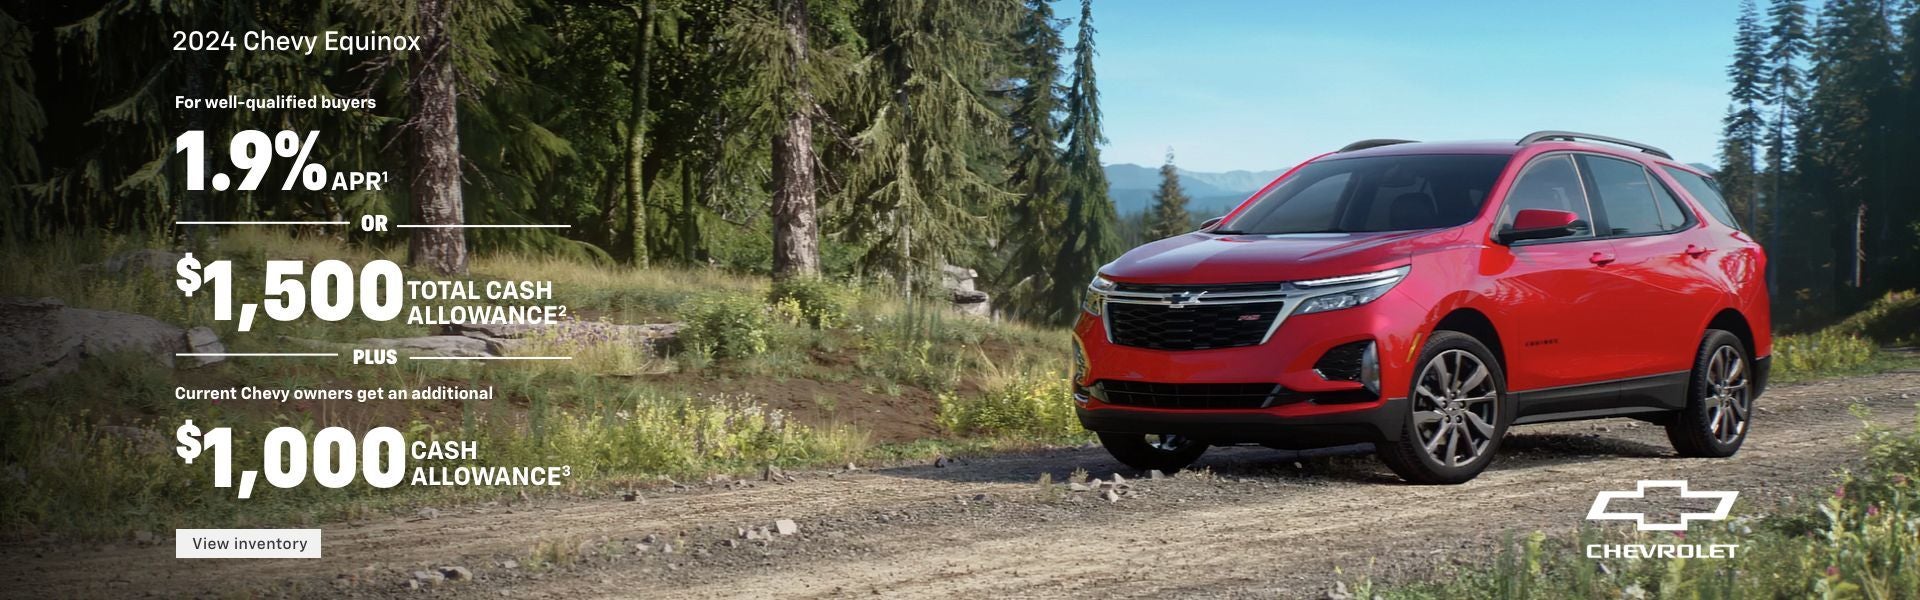 2024 Chevy Equinox. For well-qualified buyers 1.9% APR. Or, $1,500 total cash allowance. Plus, cu...